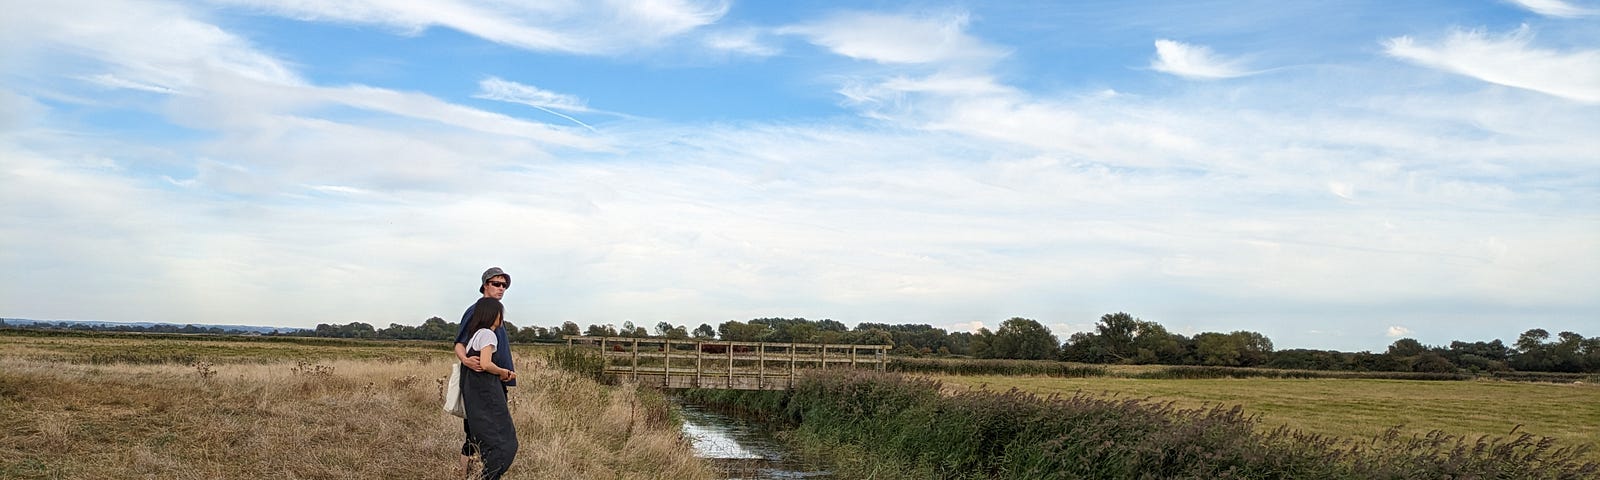 A photo of the marsh land with canal